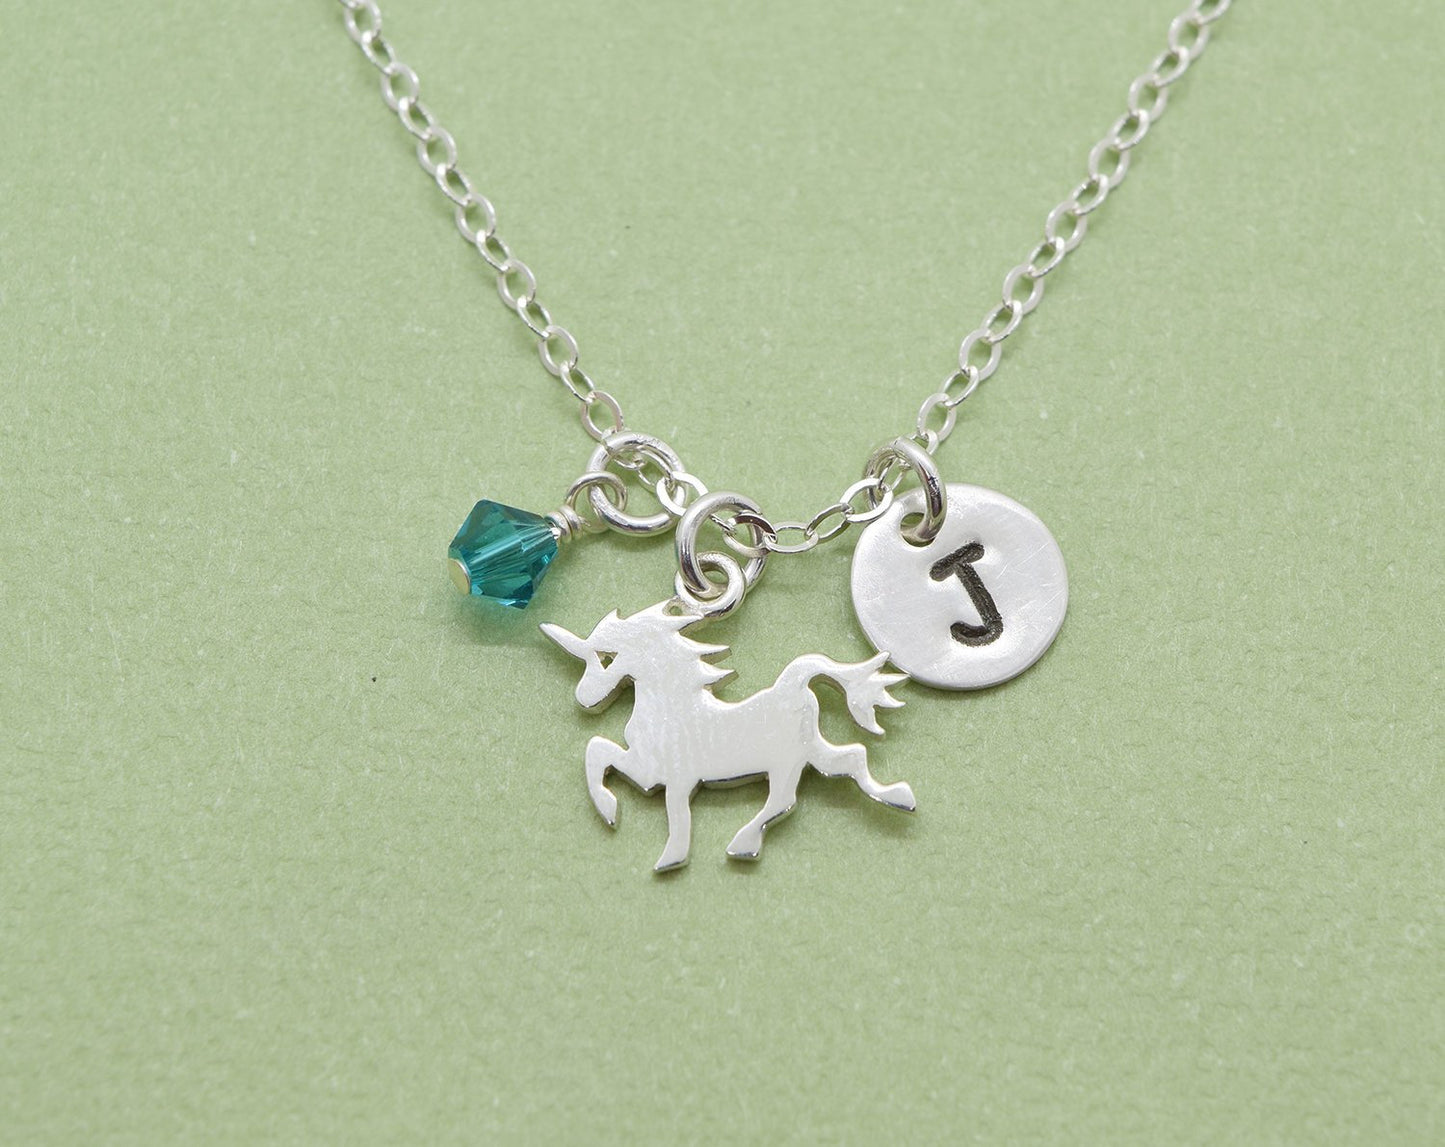 Sterling Silver Unicorn Charm Necklace